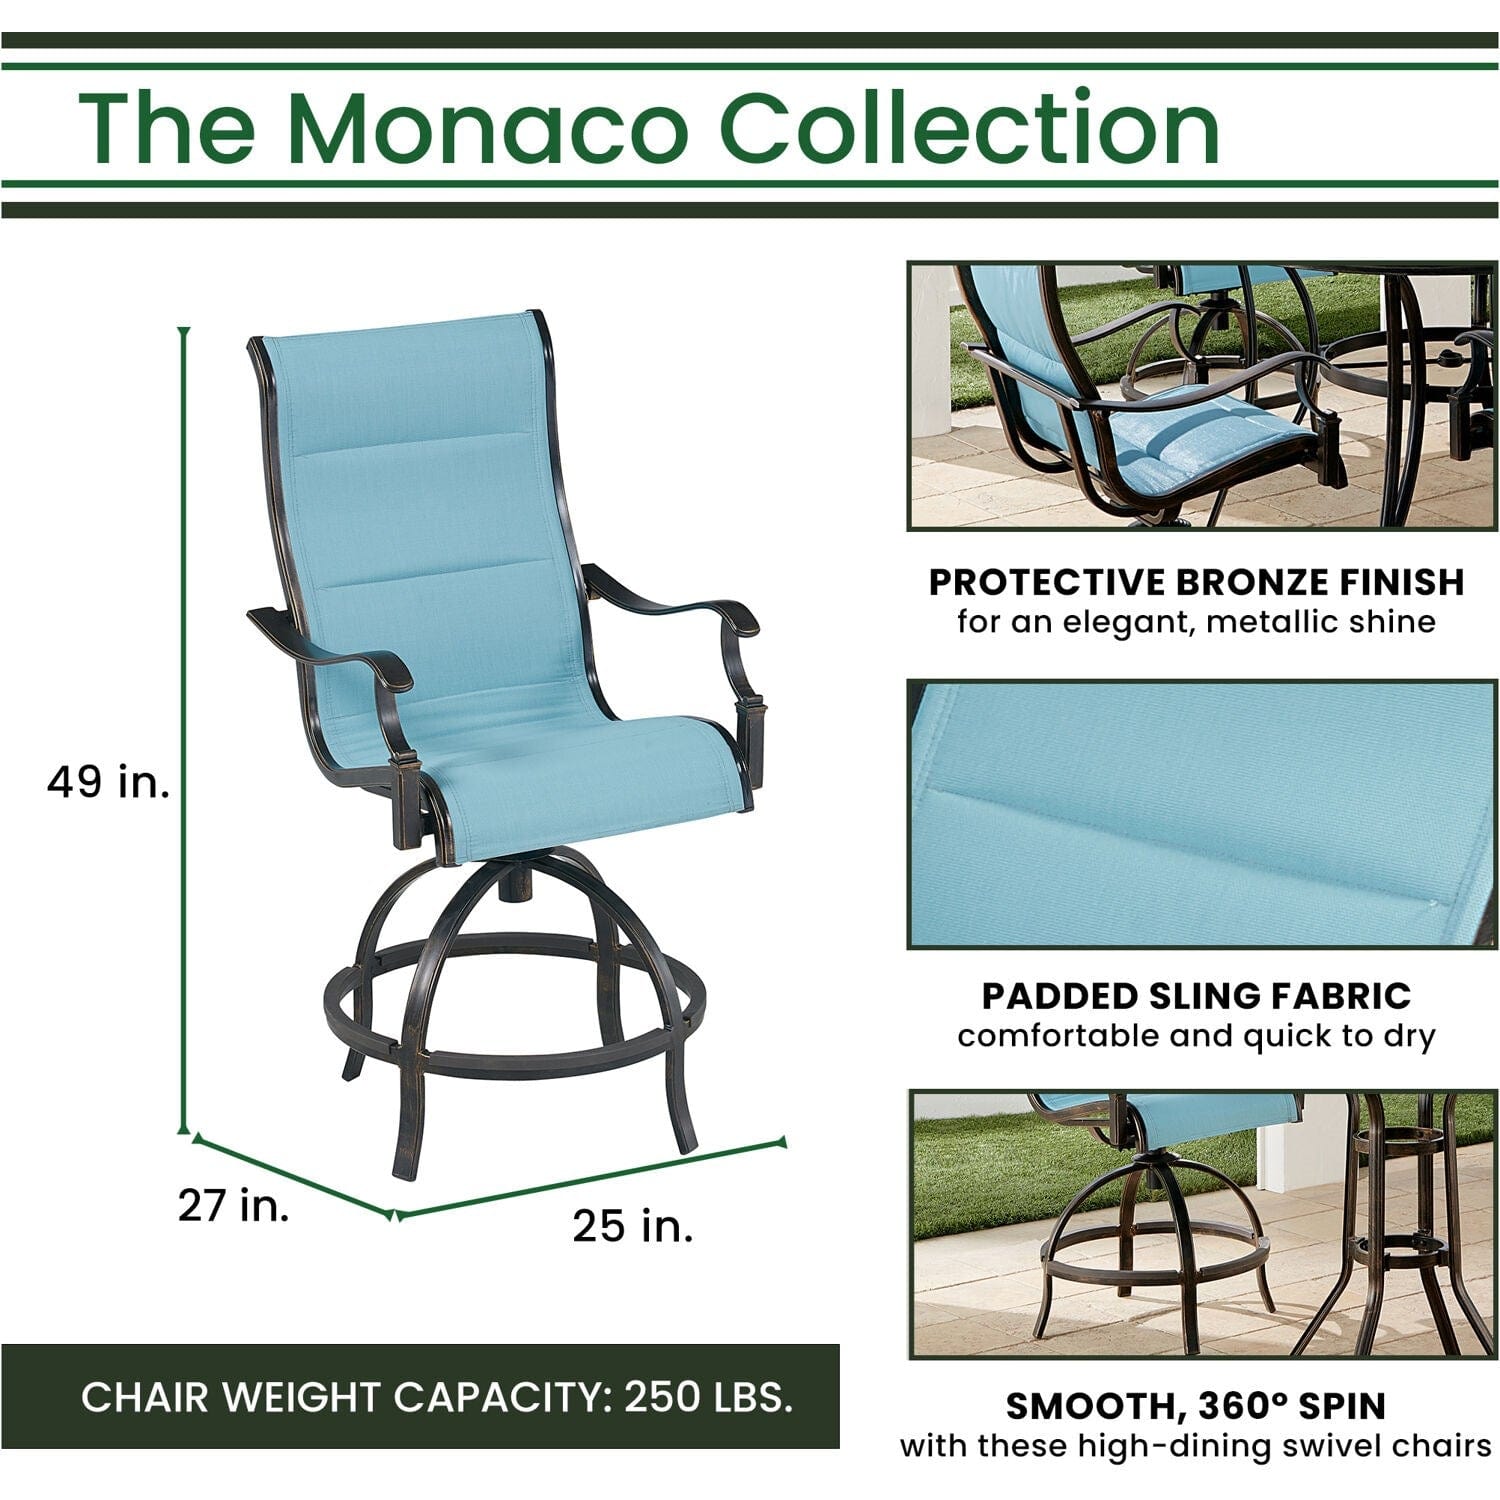 Hanover Outdoor Dining Set Hanover Monaco 7-Piece High-Dining Set in Blue with 6 Padded Counter-Height Swivel Chairs and a 56-In. Tile-Top Table | MONDN7PCPDBR-C-BLU